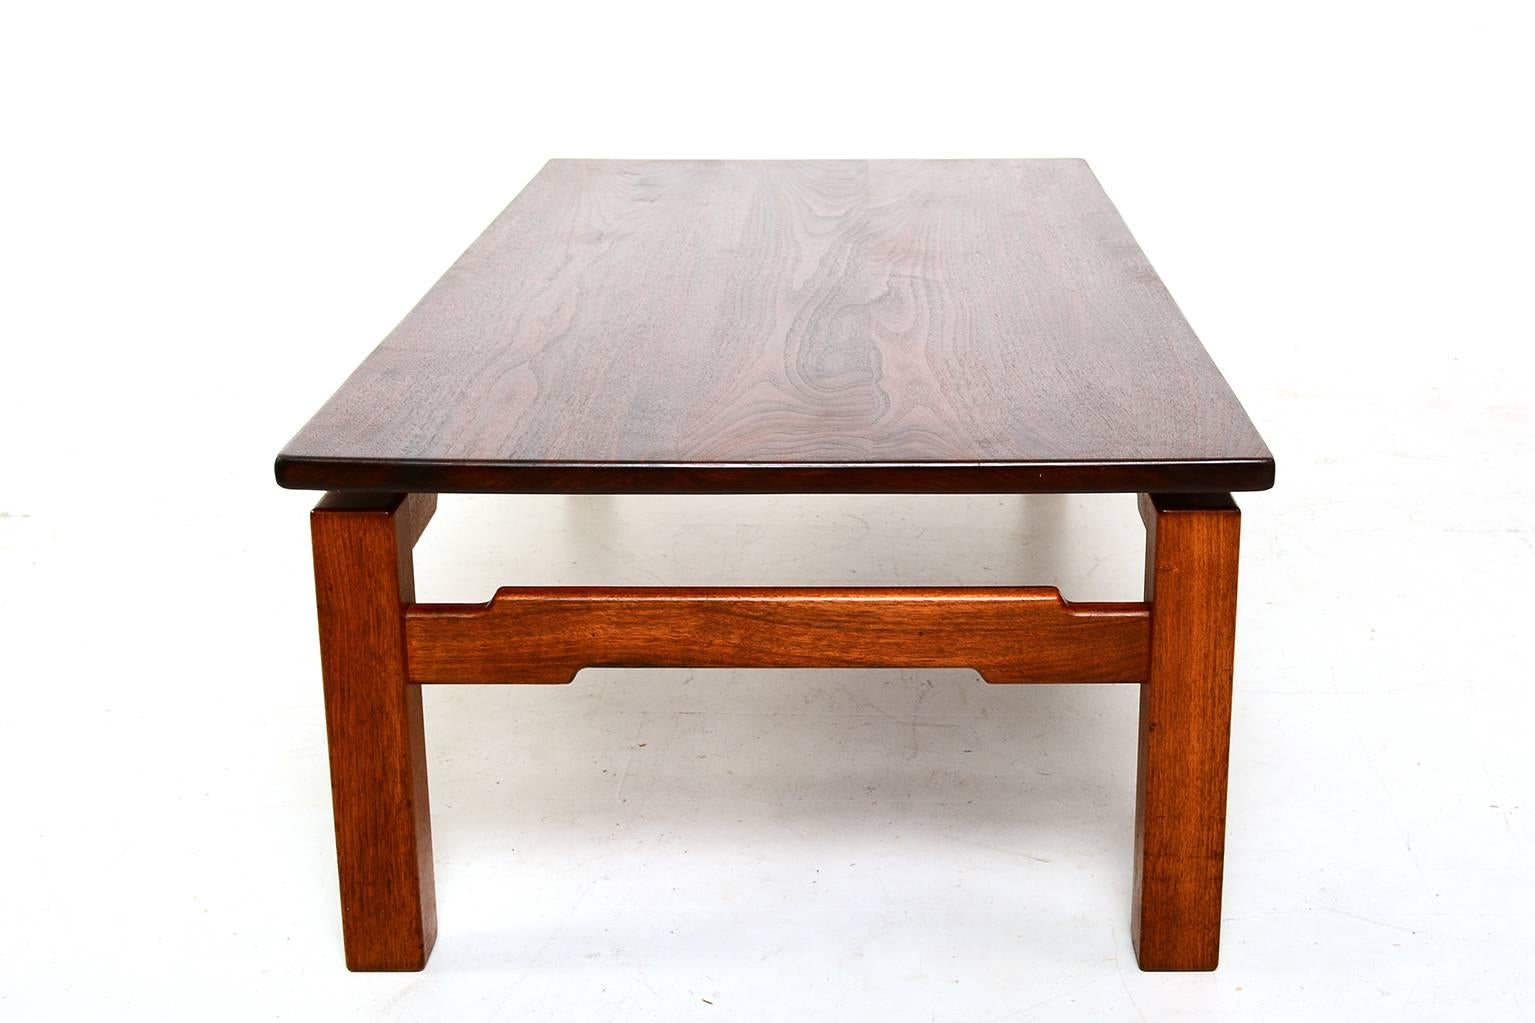 For your consideration a solid teakwood coffee table with sculptural shape and great quality craftsmanship details.

No stamp present from the maker.
 